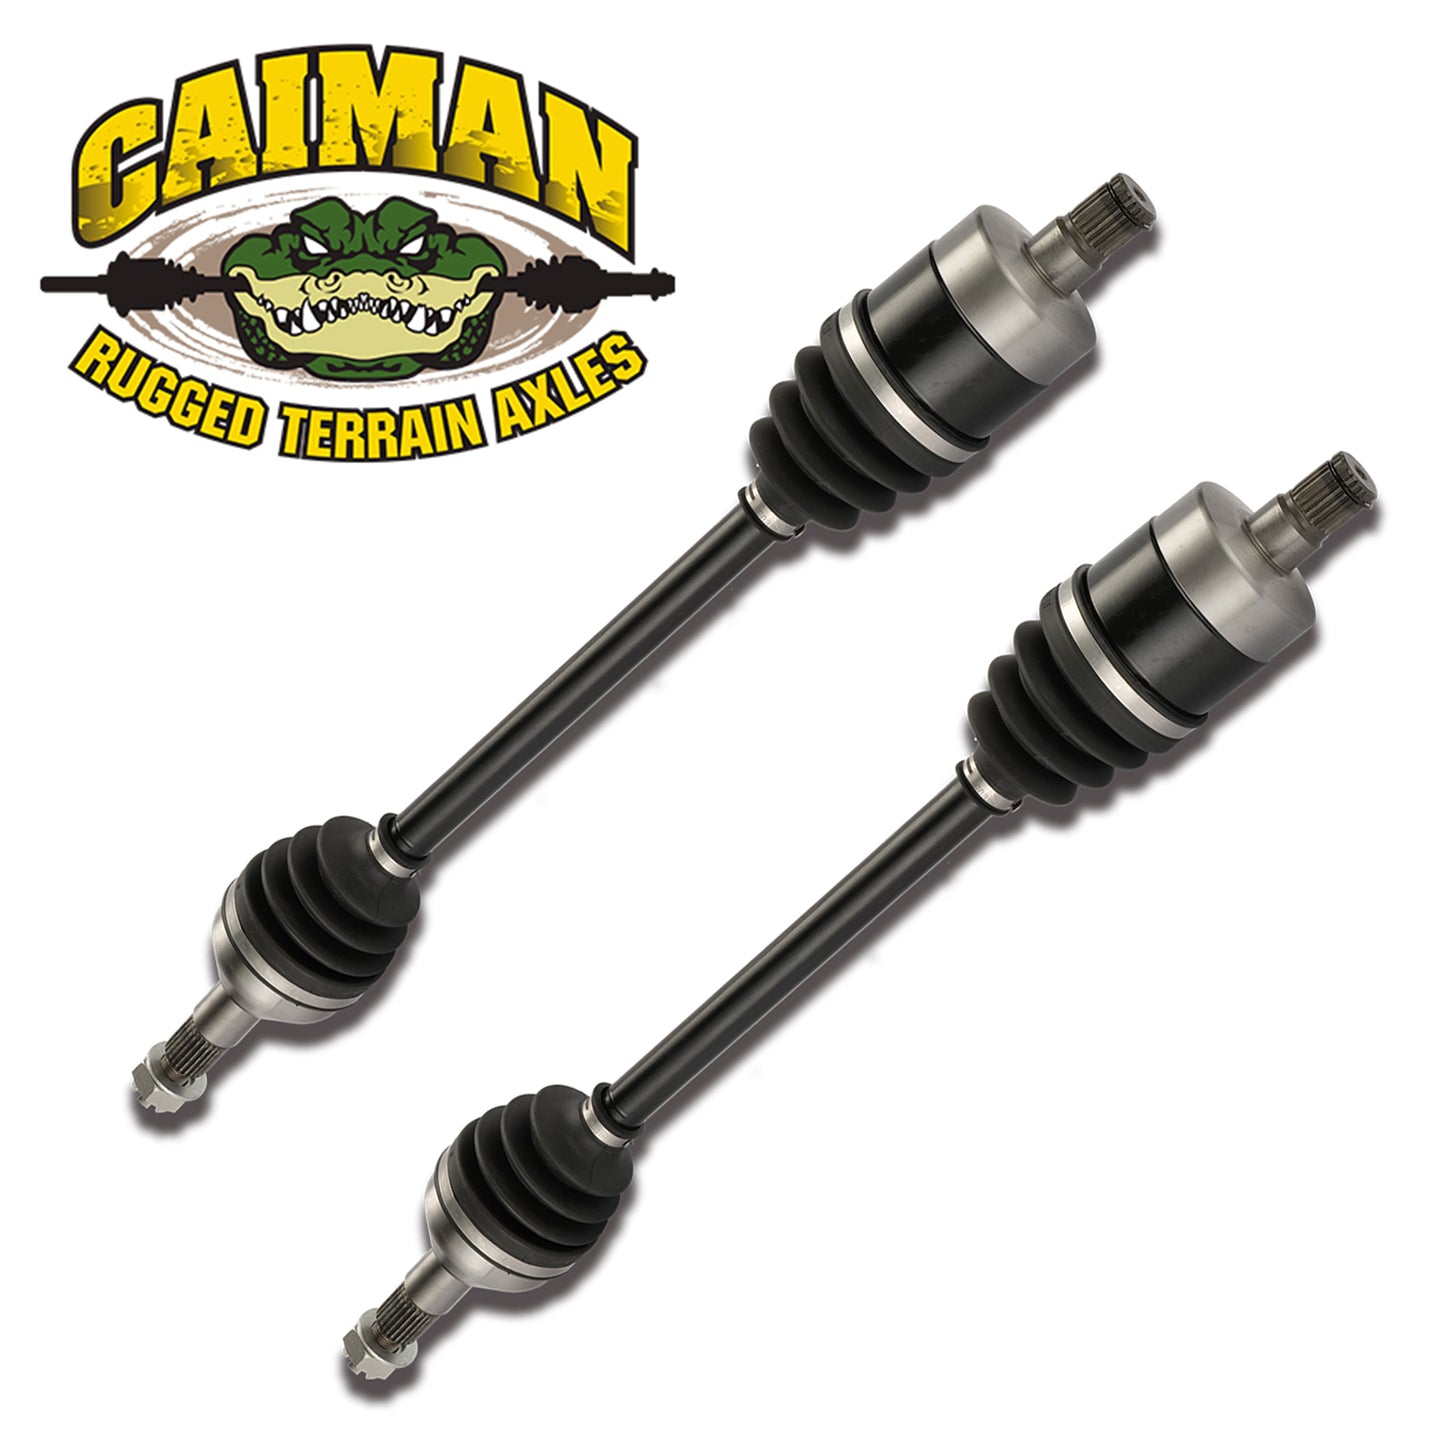 CAM-KW131 Front Left Drive Shaft CV Axle for 2005-2013 BRUTE FORCE 650 59266-0032,59266-1122